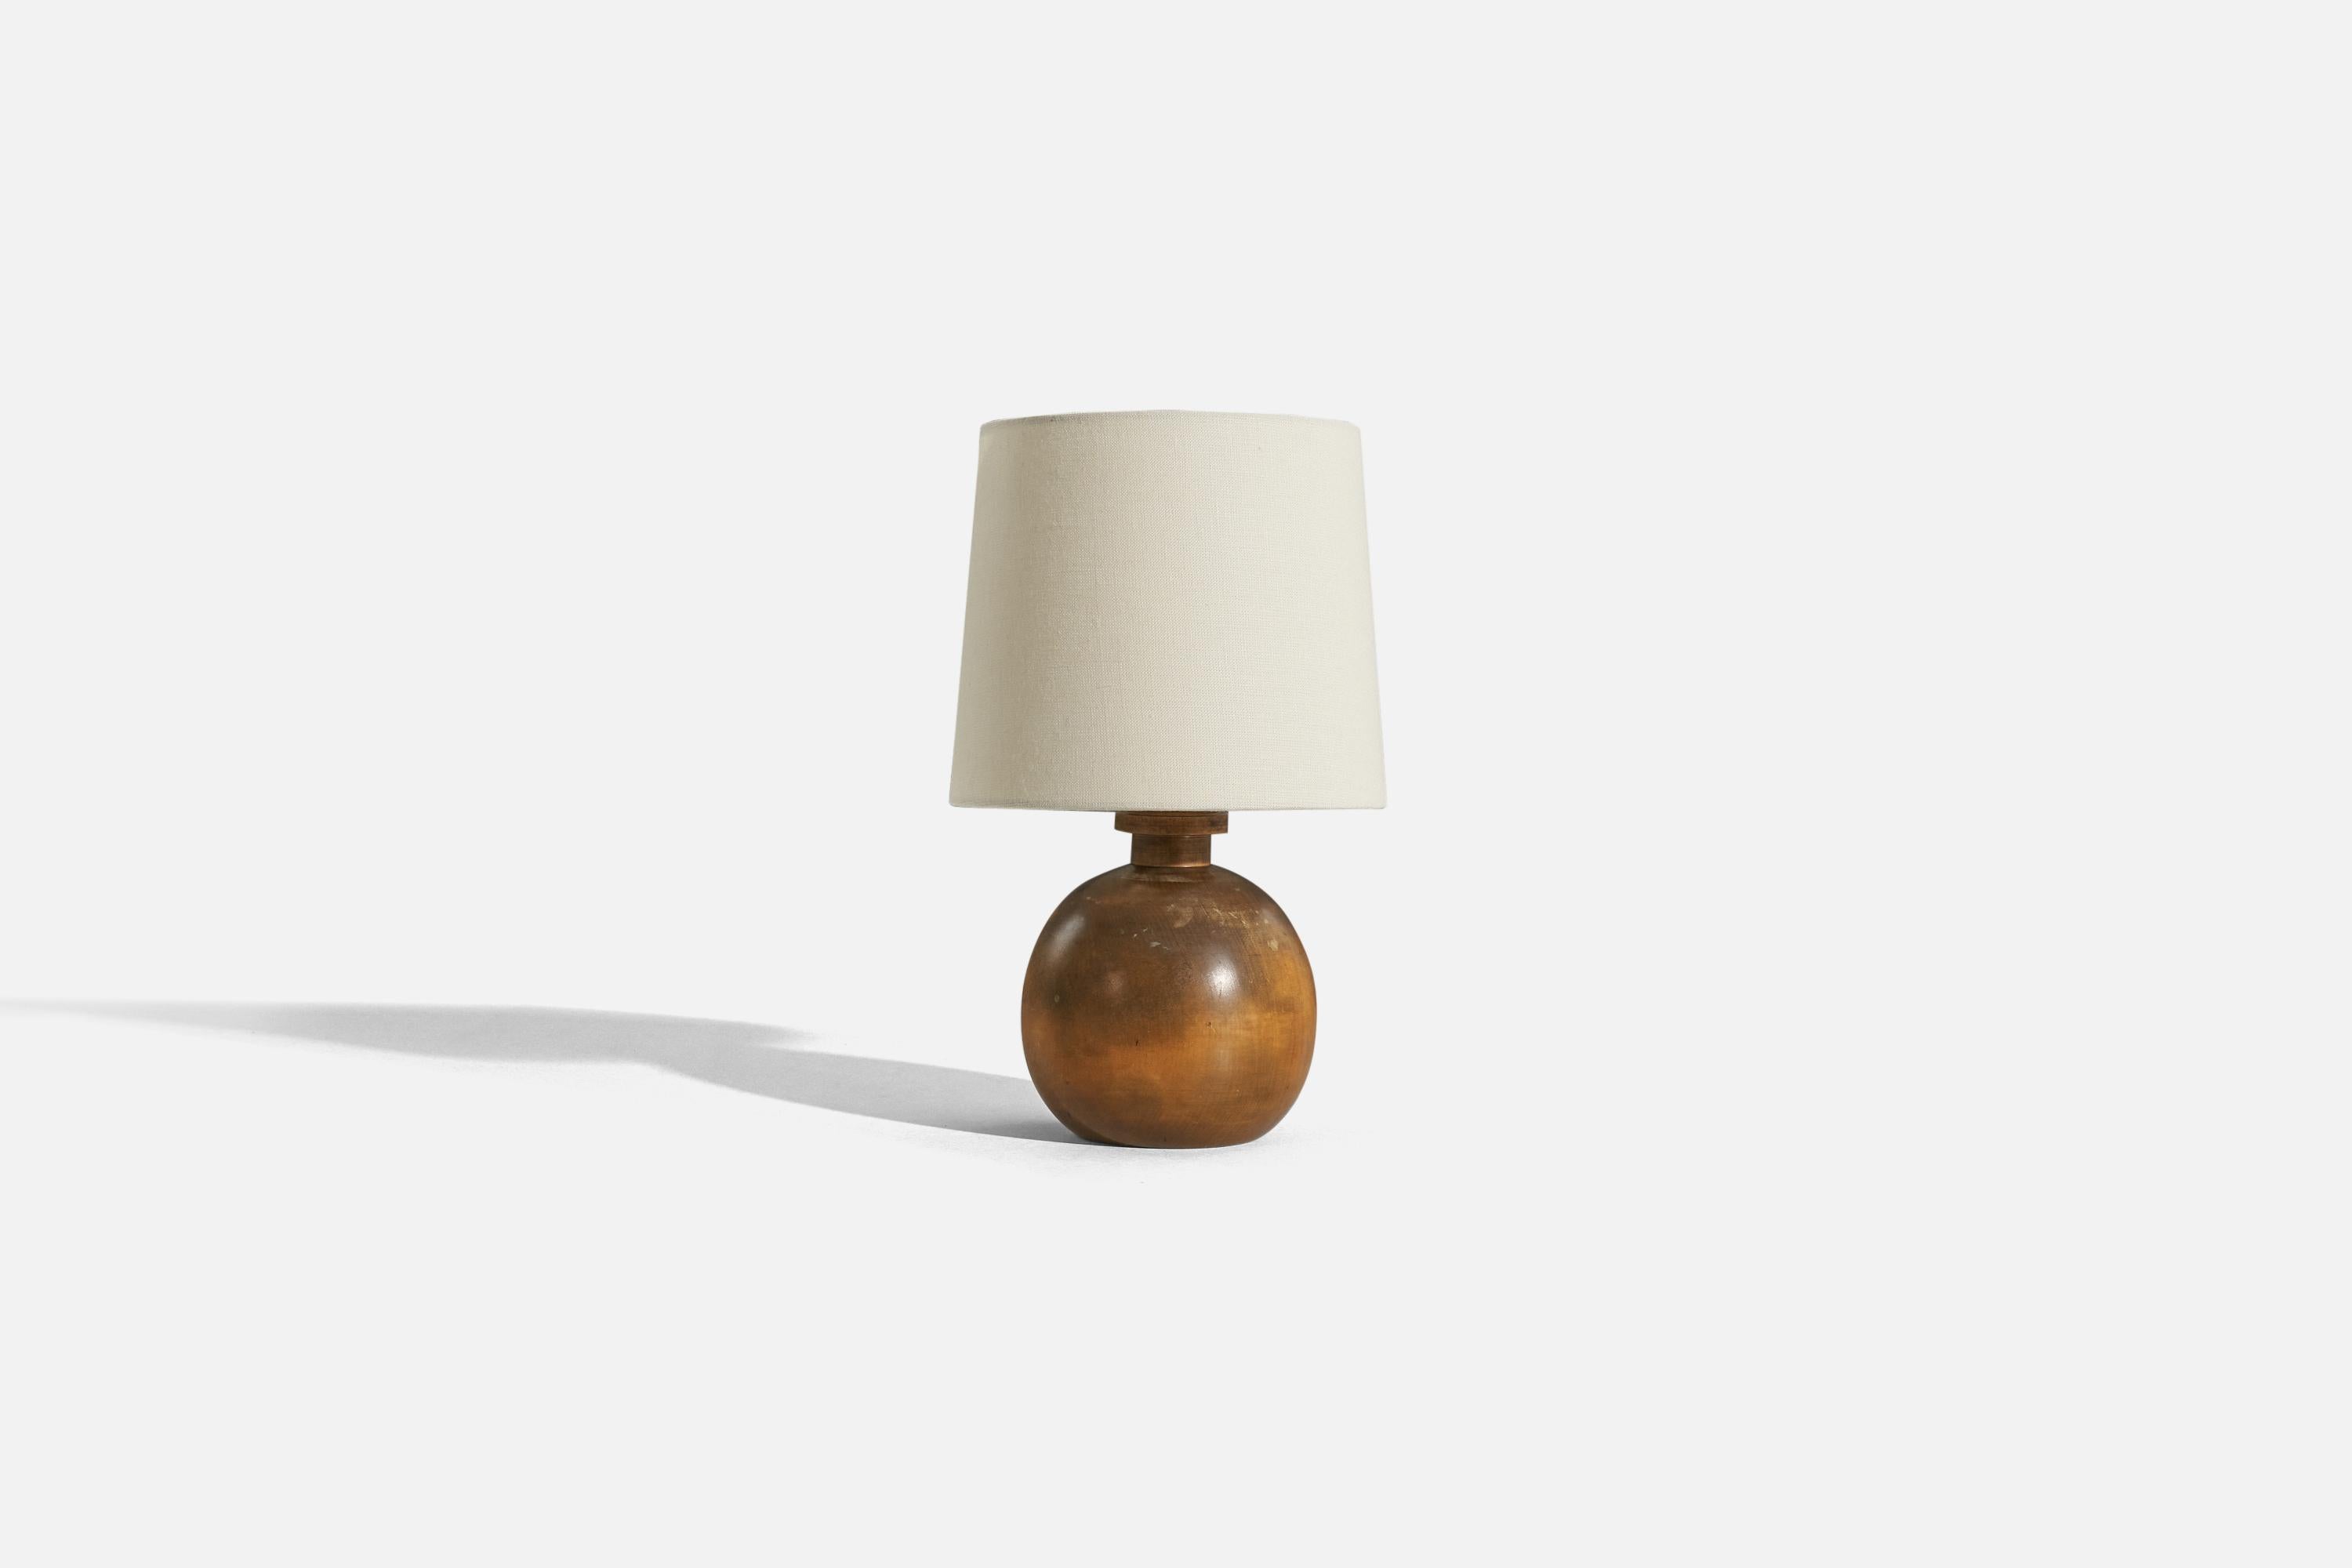 A wooden table lamp designed and produced in Sweden, c. 1930-1940s. 

Sold without lampshade. 
Dimensions of lamp (inches) : 9.125 x 5.625 x 5.625 (H x W x D)
Dimensions of shade (inches) : 7 x 8 x 7 (T x B x H)
Dimension of lamp with shade